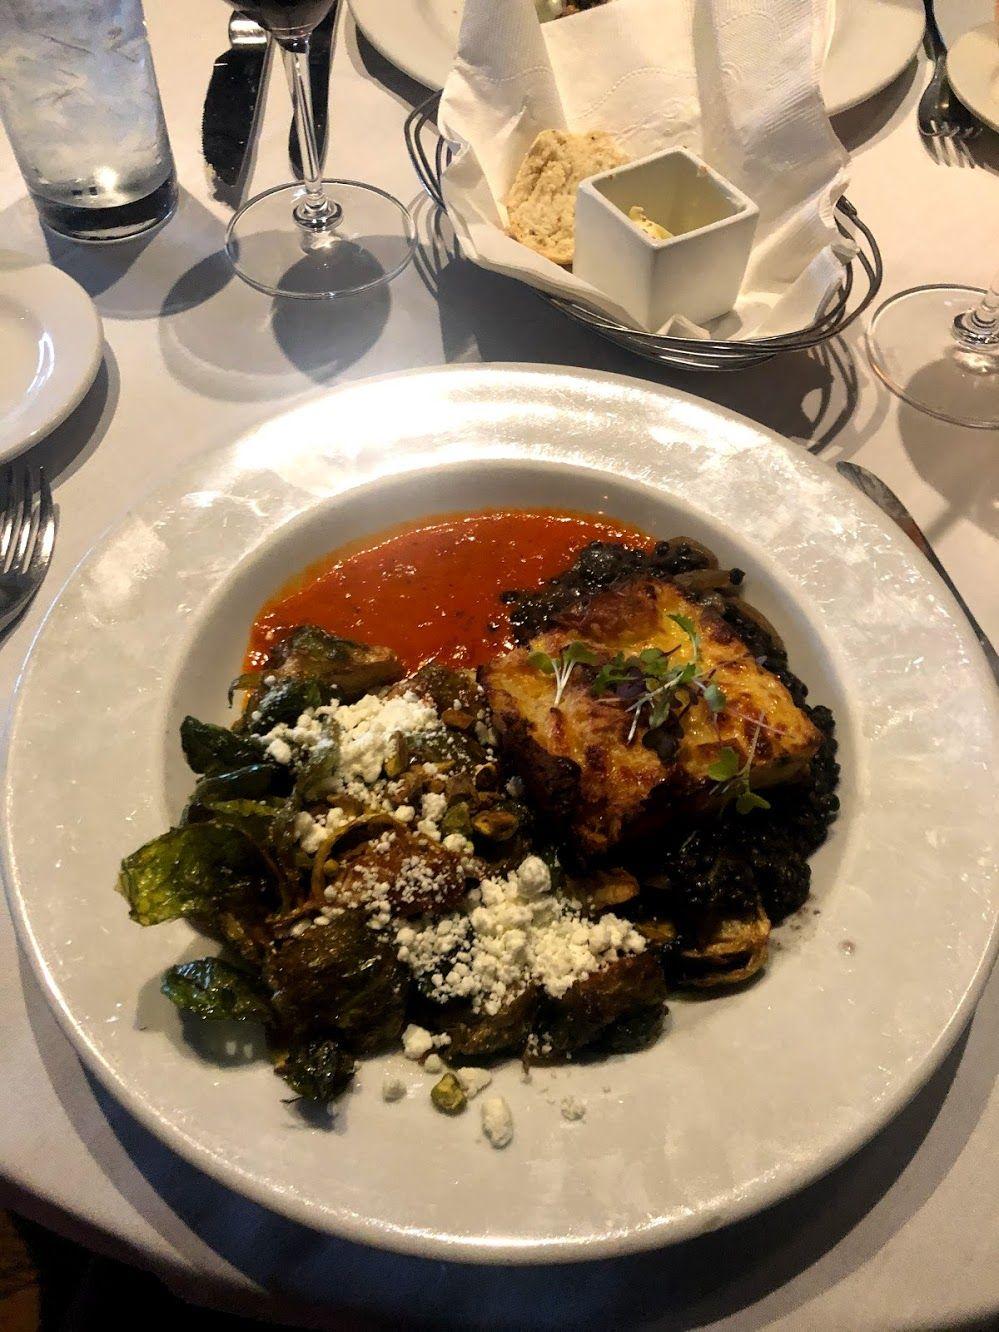 A plate with cauliflower, brussel sprouts and a red sauce.